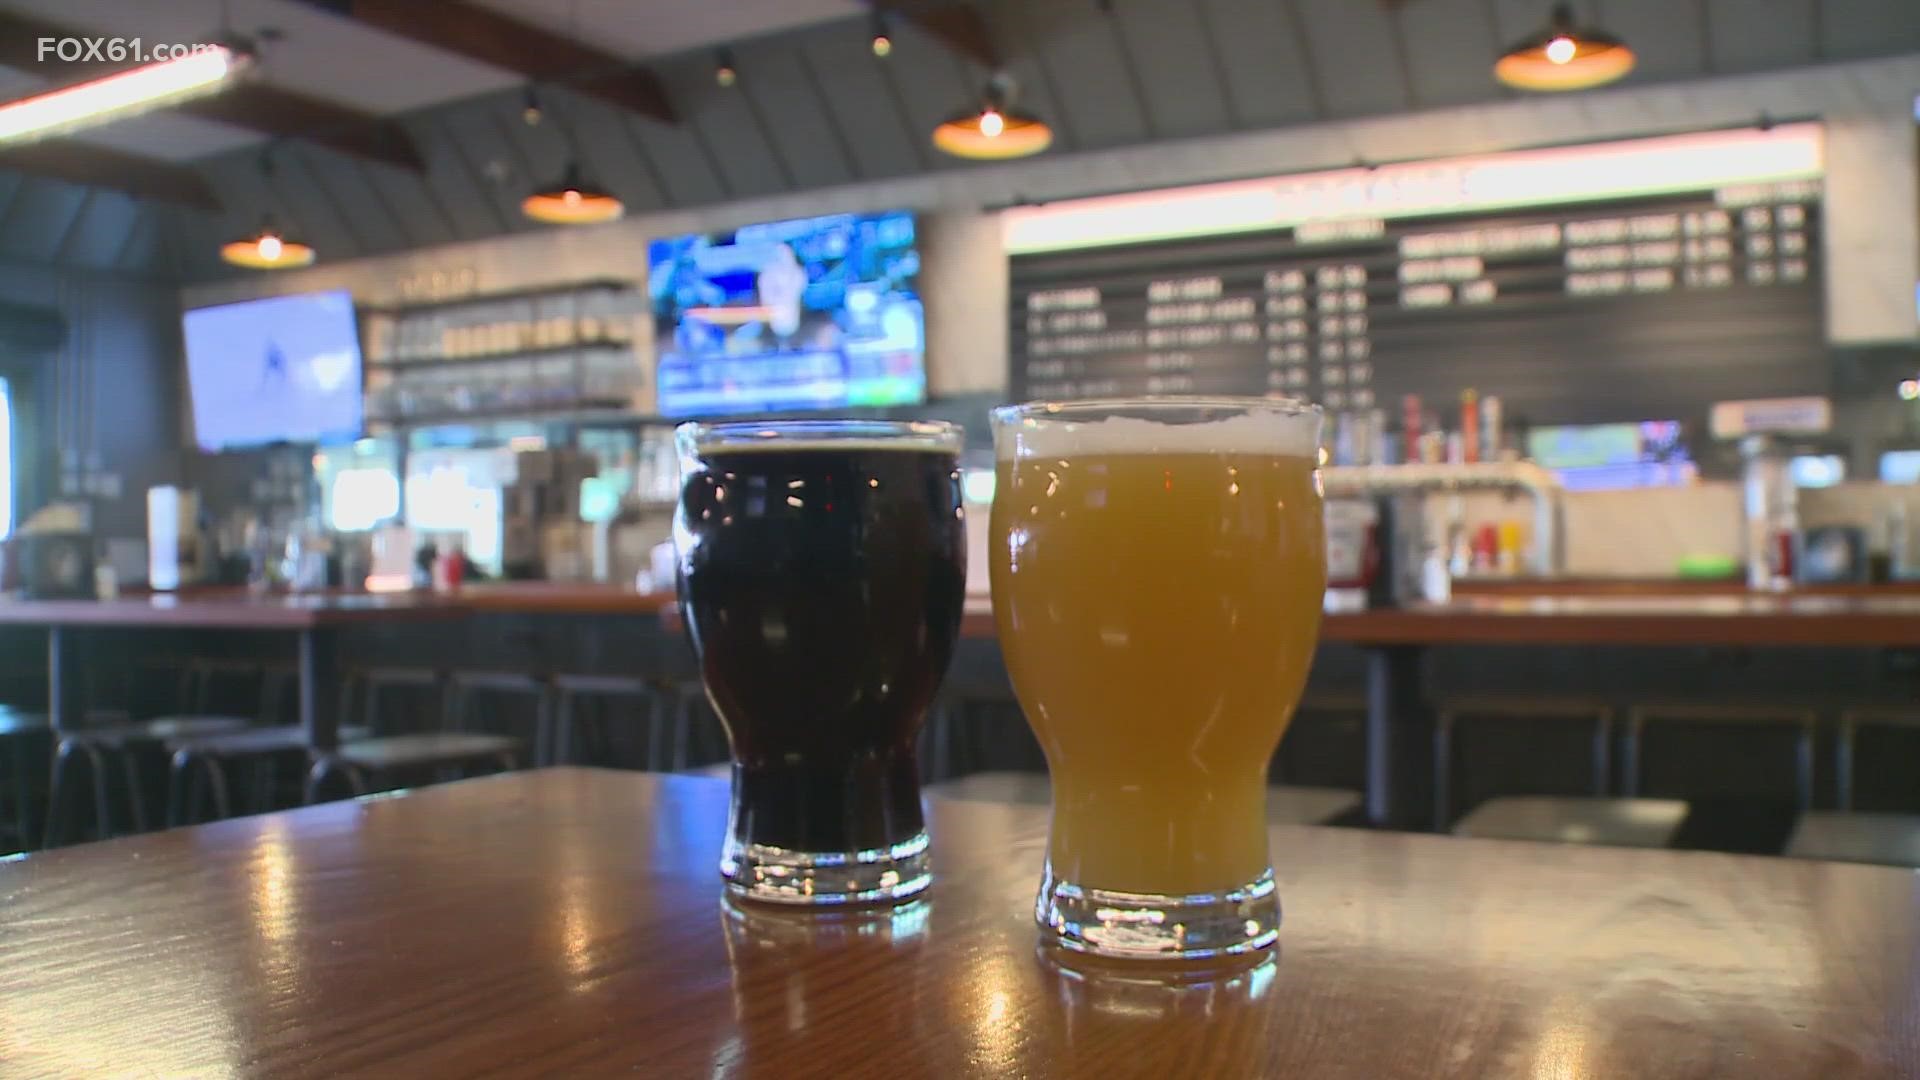 Dockside Brewery in Milford has been getting ready for the Super Bowl for months as they see a huge boom in business.